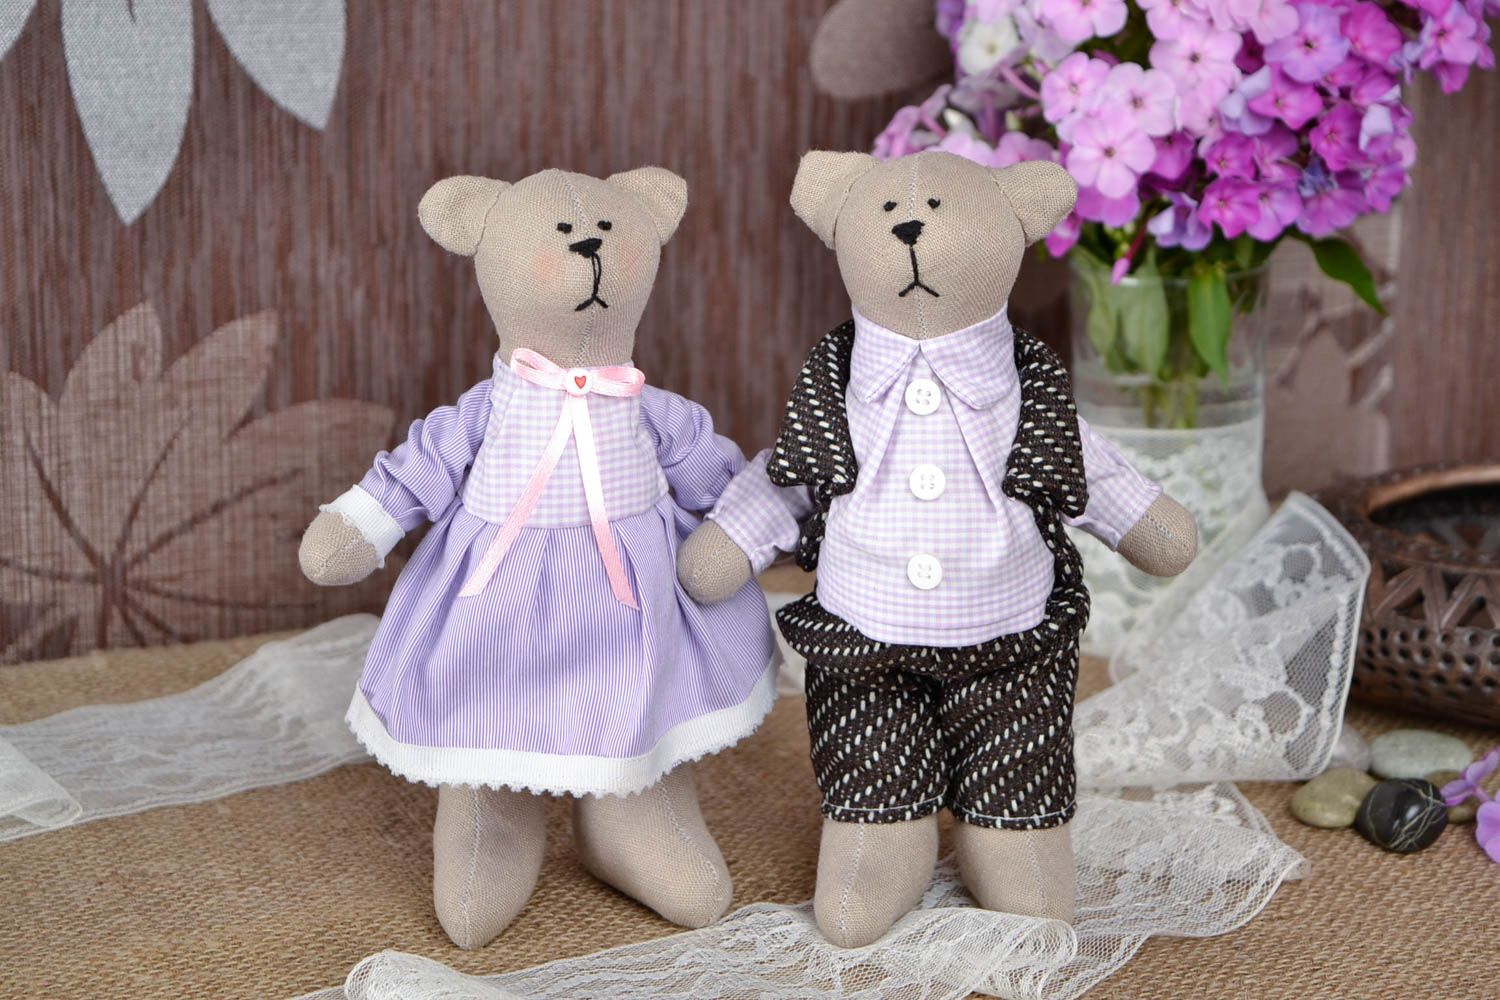 Toy bears handmade toys cuddly toys homemade home decor gift ideas for kids photo 1